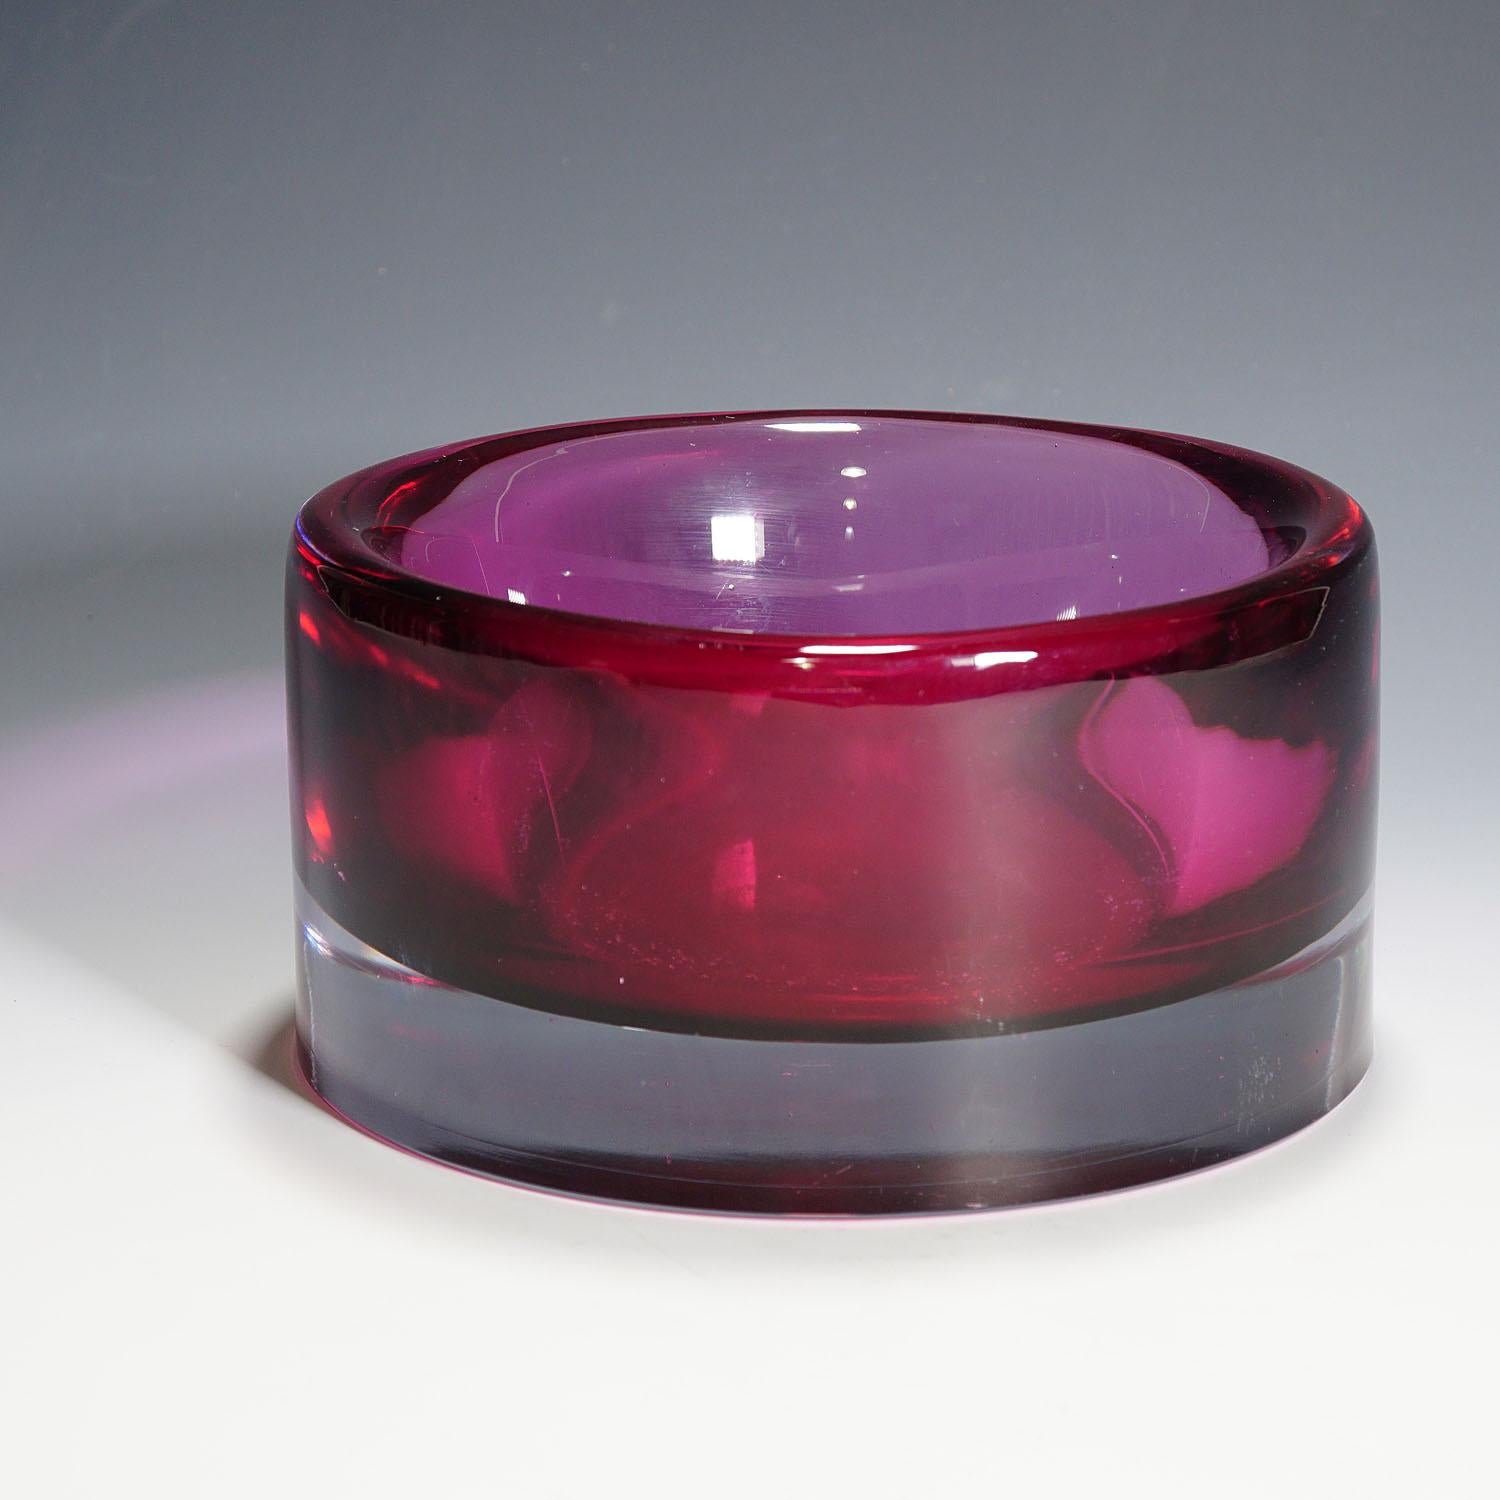 A very heavy sommerso glass bowl manufactured by Seguso Vetri D'Arte and designed by Mario Pinzoni ca. 1969. Manufactured in thick violett and ruby sommerso glass. An authentic midcentury modern piece from Murano. Very good condition with minor